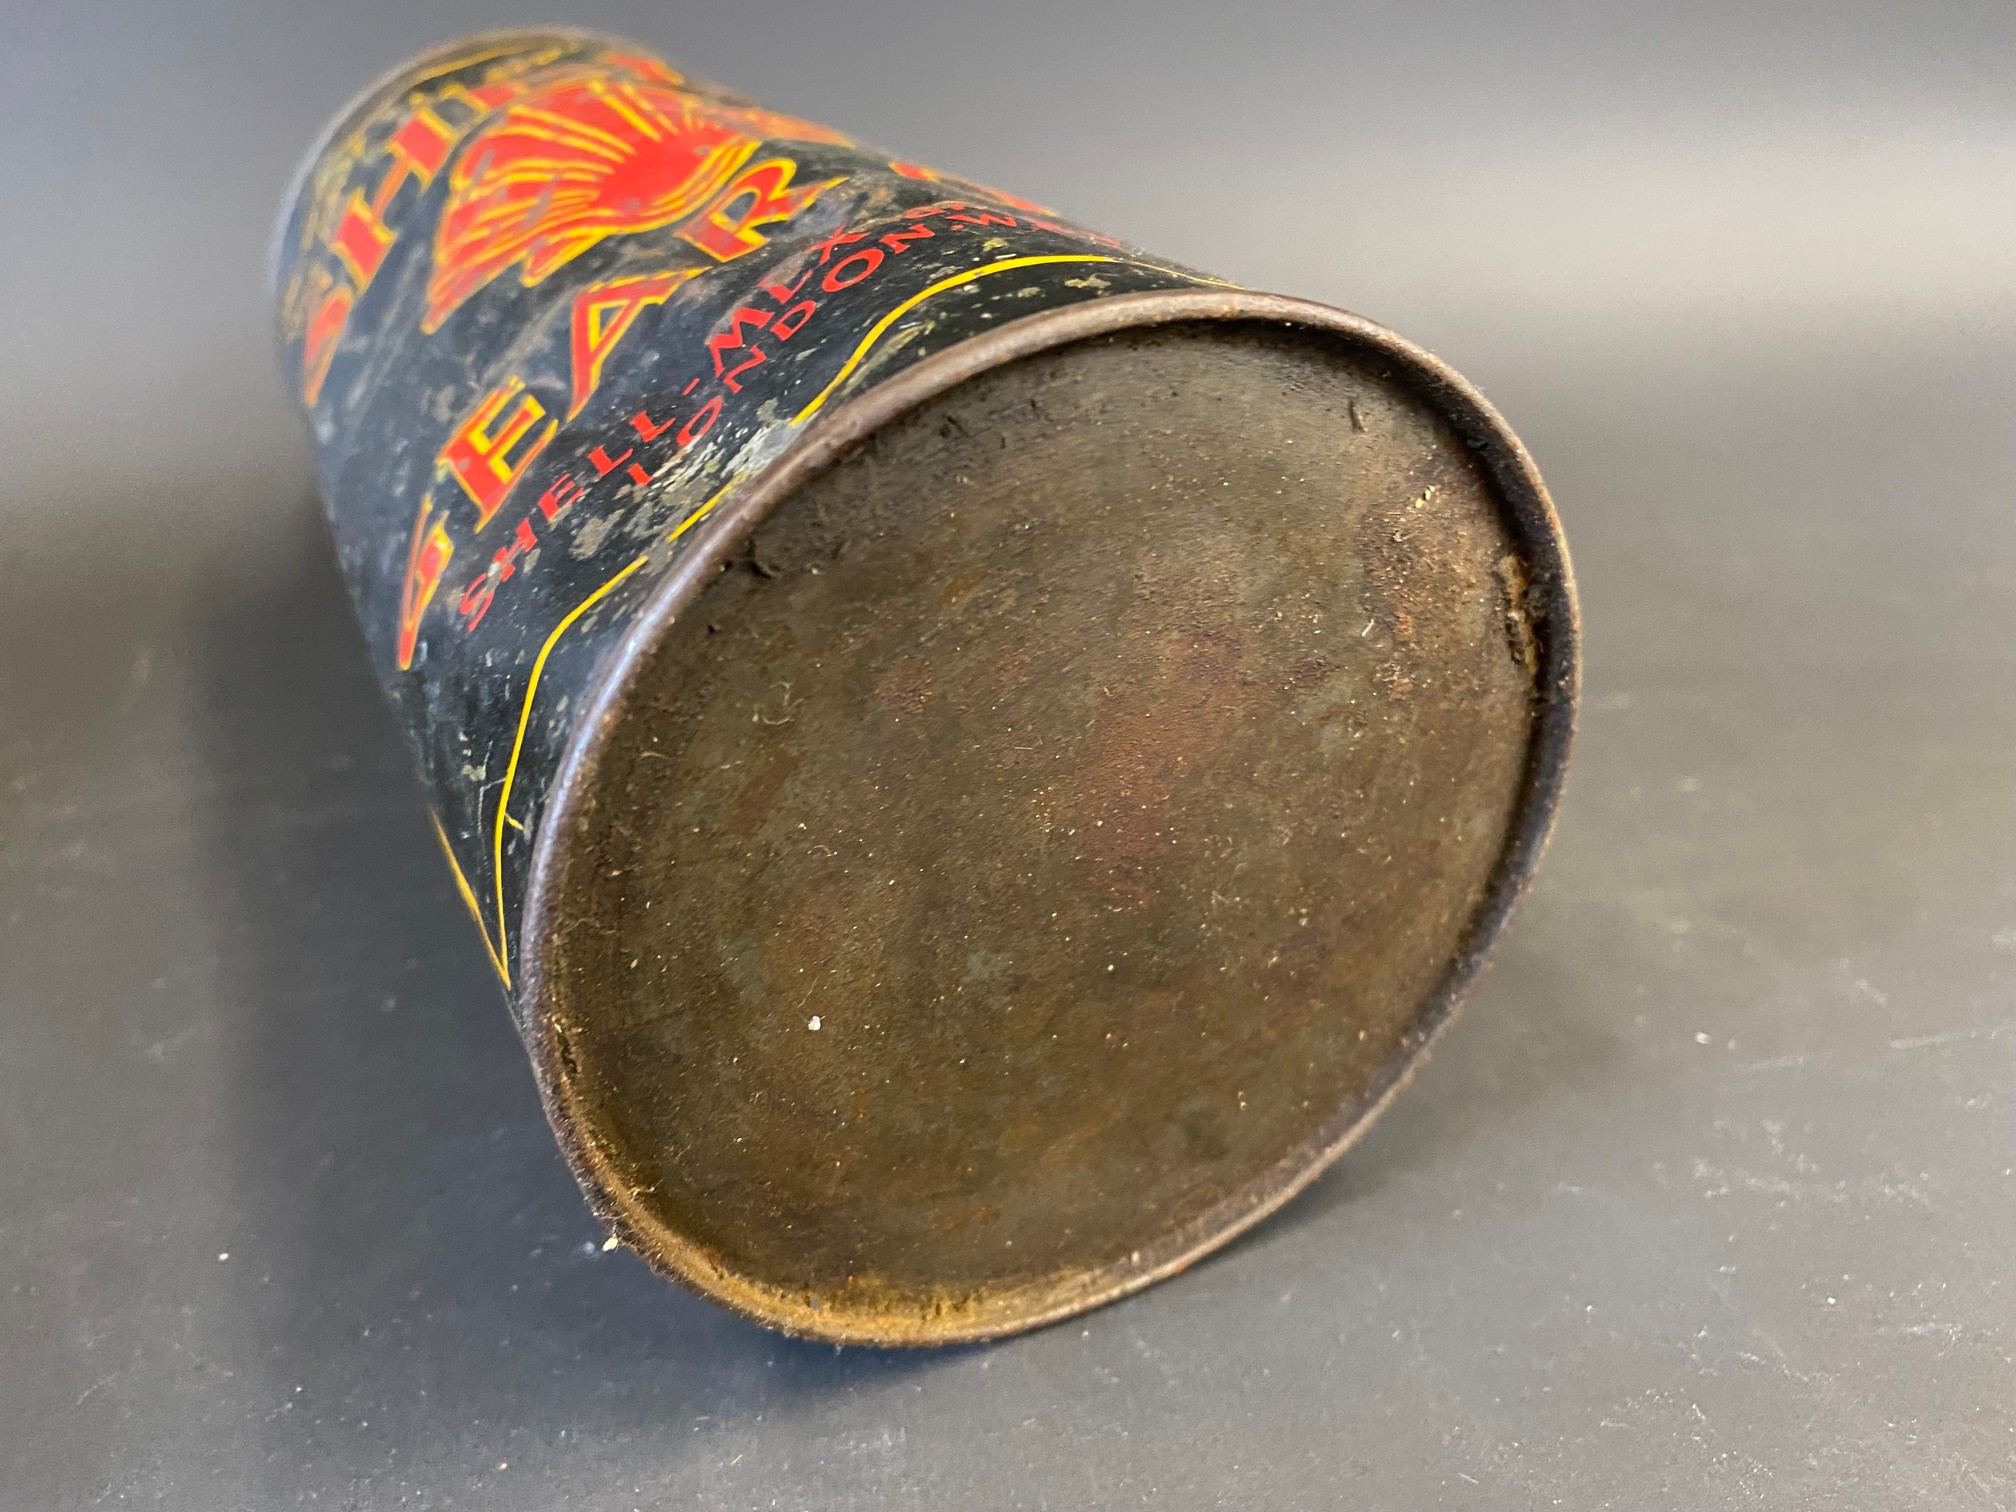 A Shell Motor Oil half gallon can, plus a Shell Gear Oil cylindrical quart can, with original cap. - Image 10 of 10